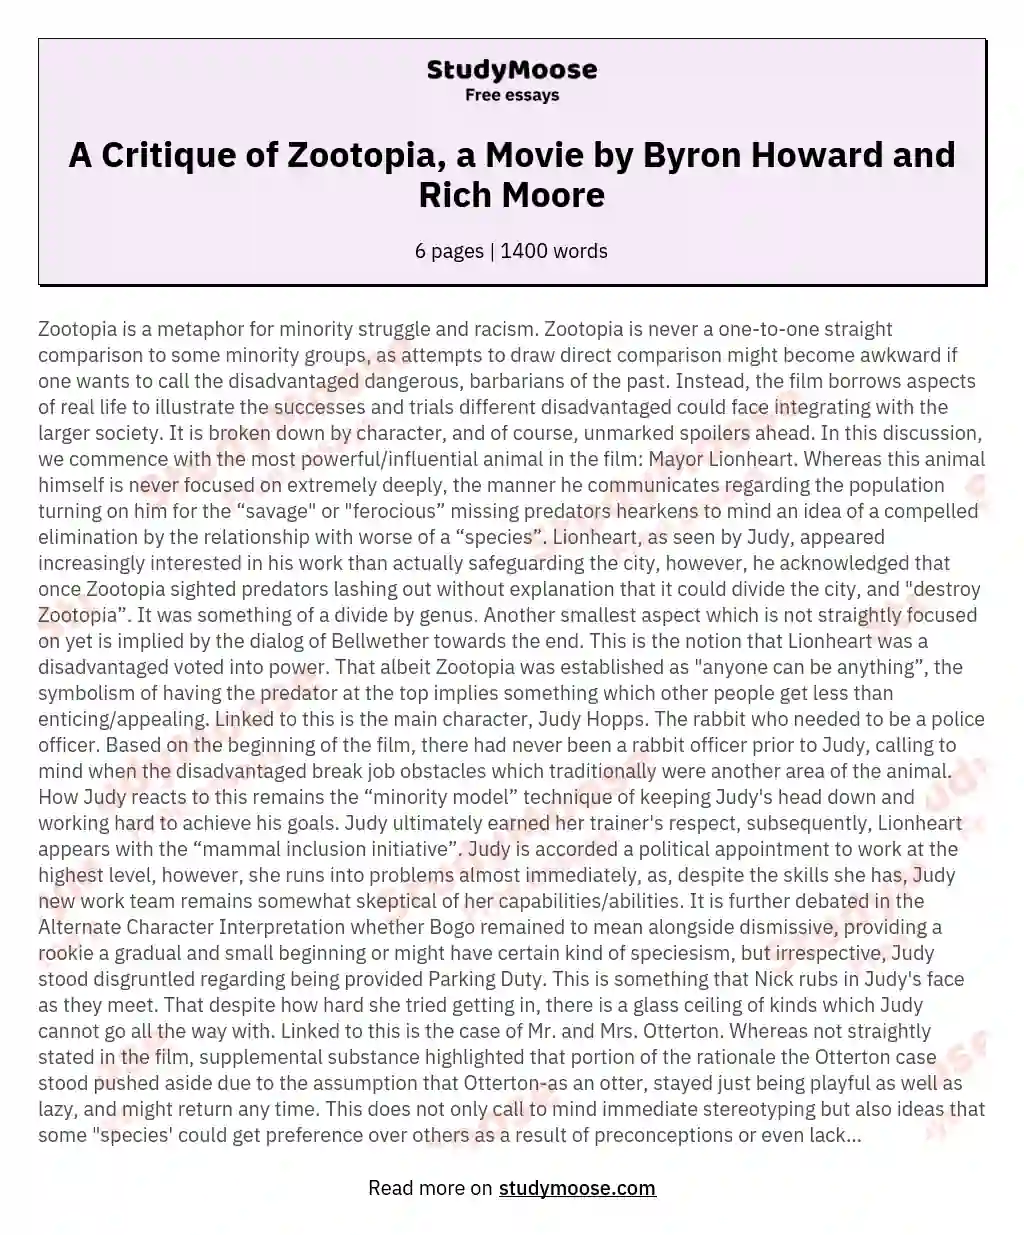 A Critique of Zootopia, a Movie by Byron Howard and Rich Moore essay